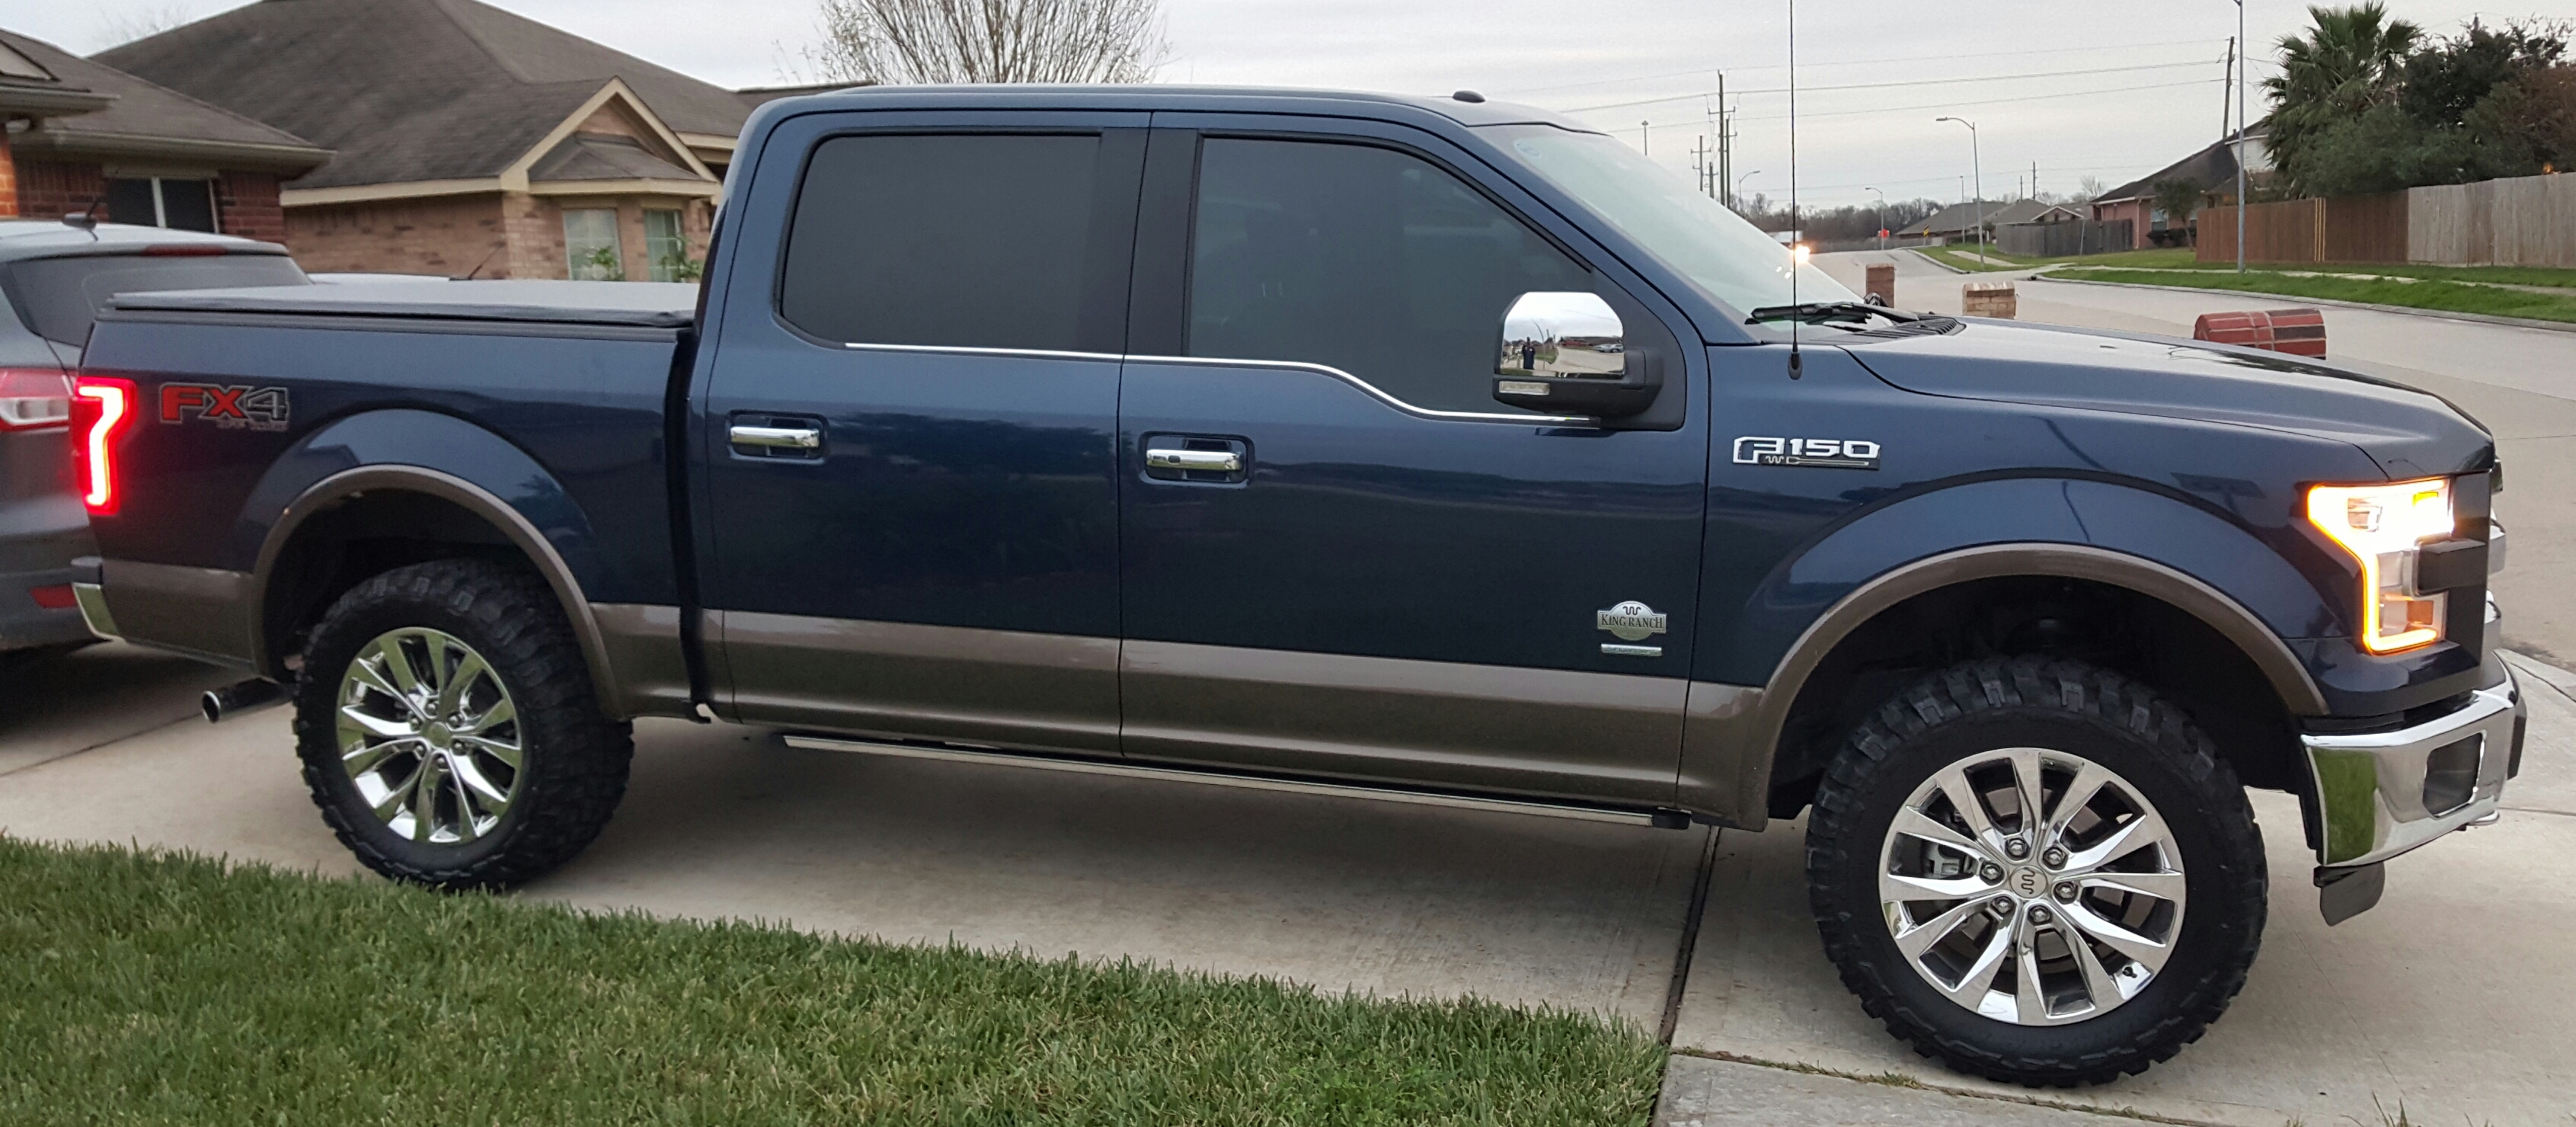 Lets see your wheels/tire setup on 2015+ - Page 4 - Ford F150 Forum